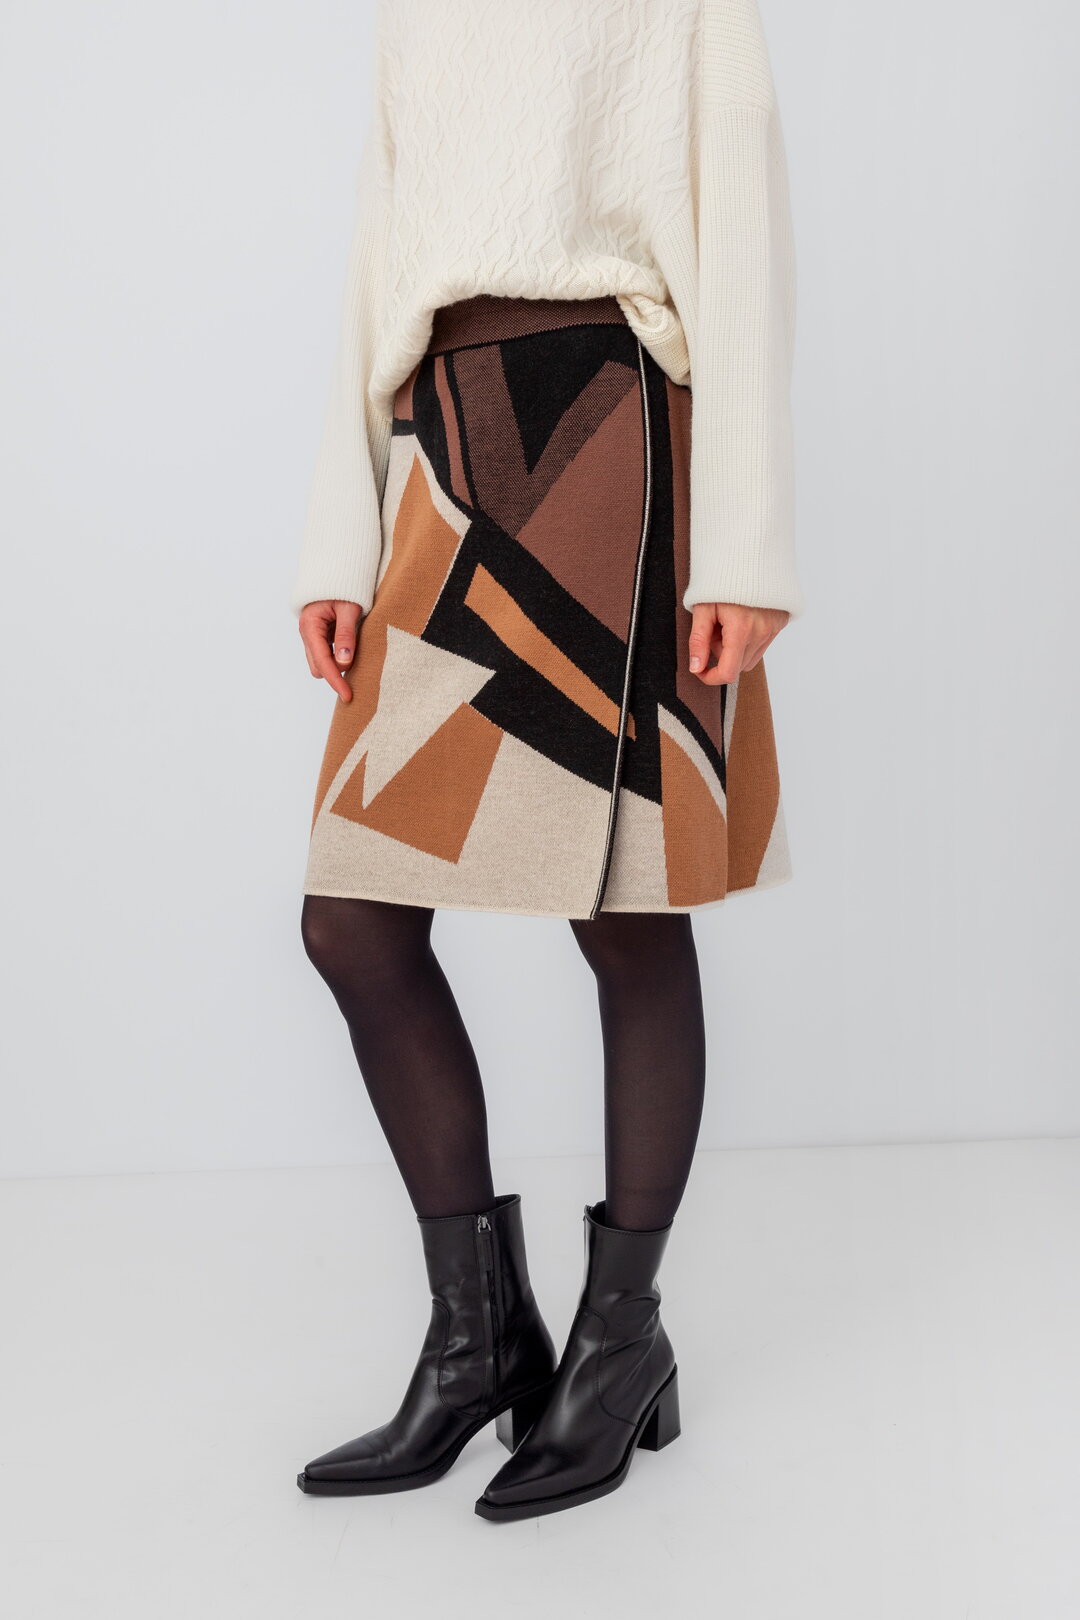 Skirt, Abstract Pattern